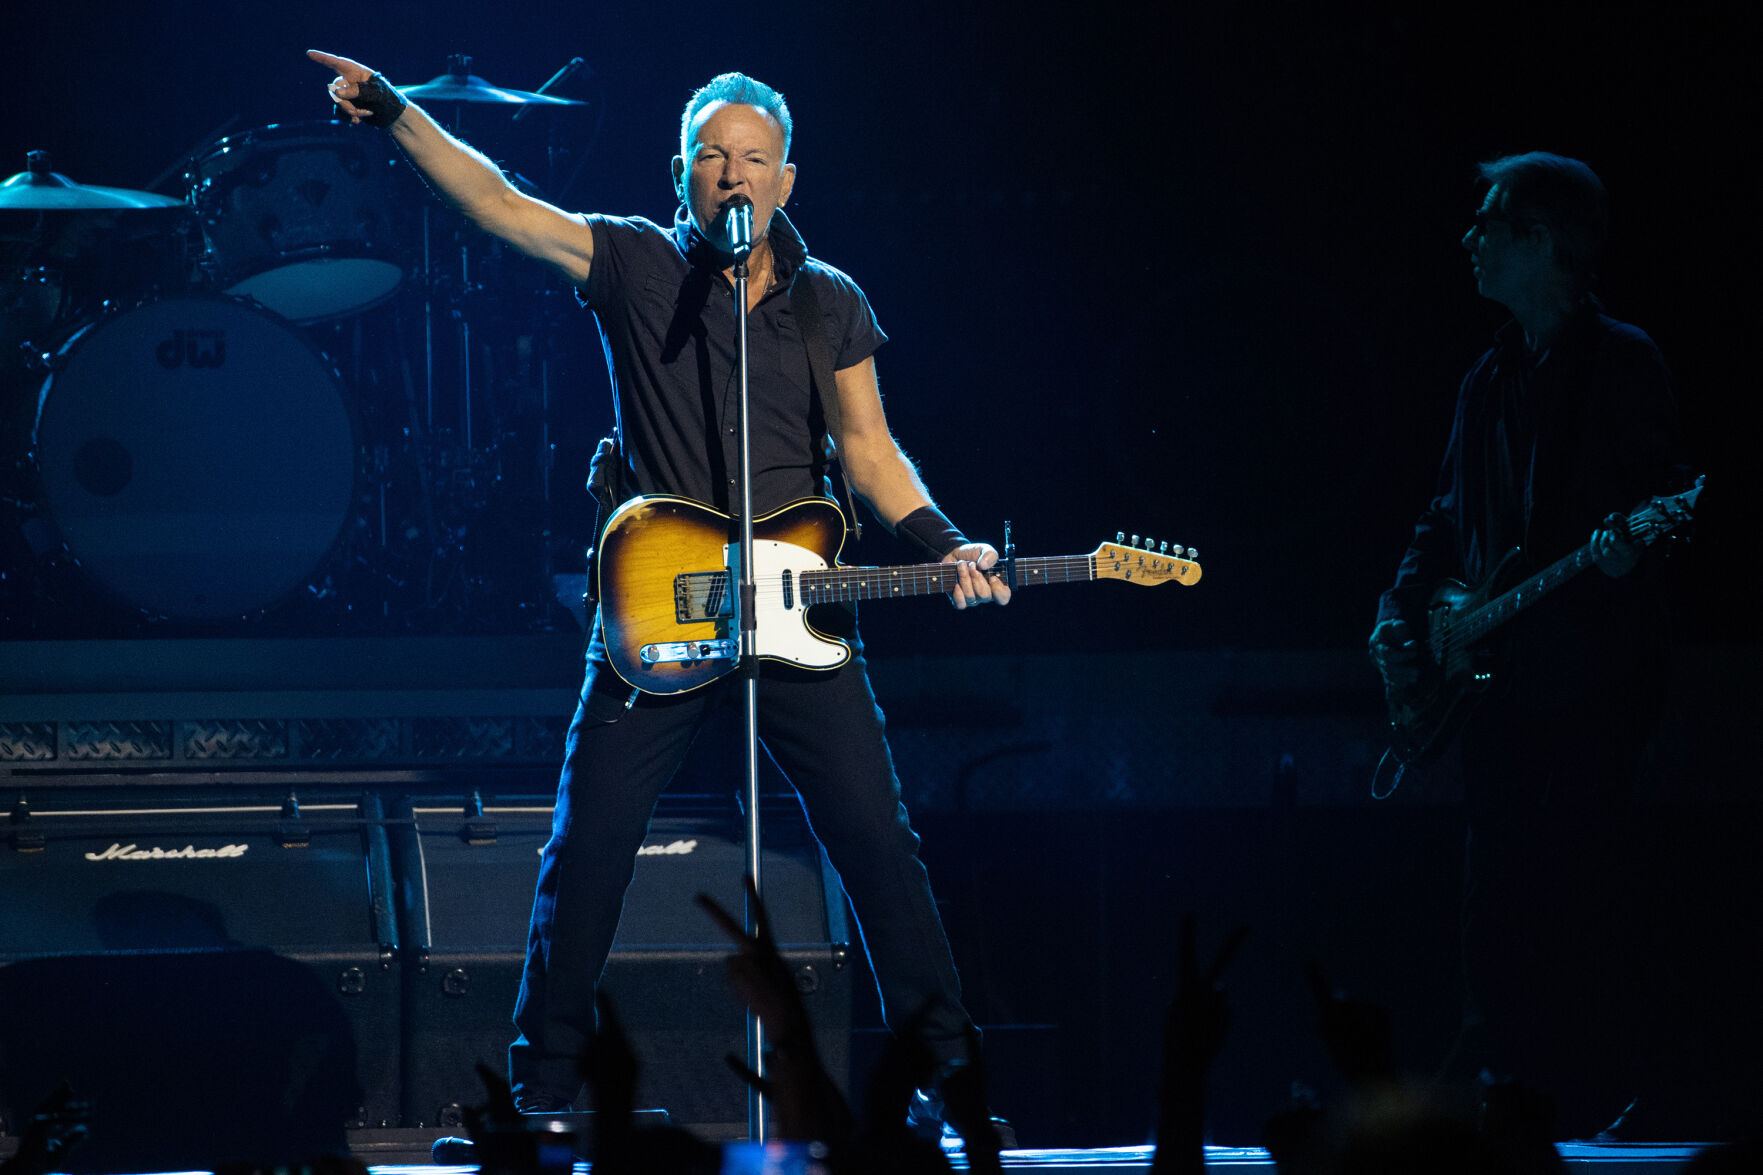 Bruce Springsteen and The E Street Band confirm their first San